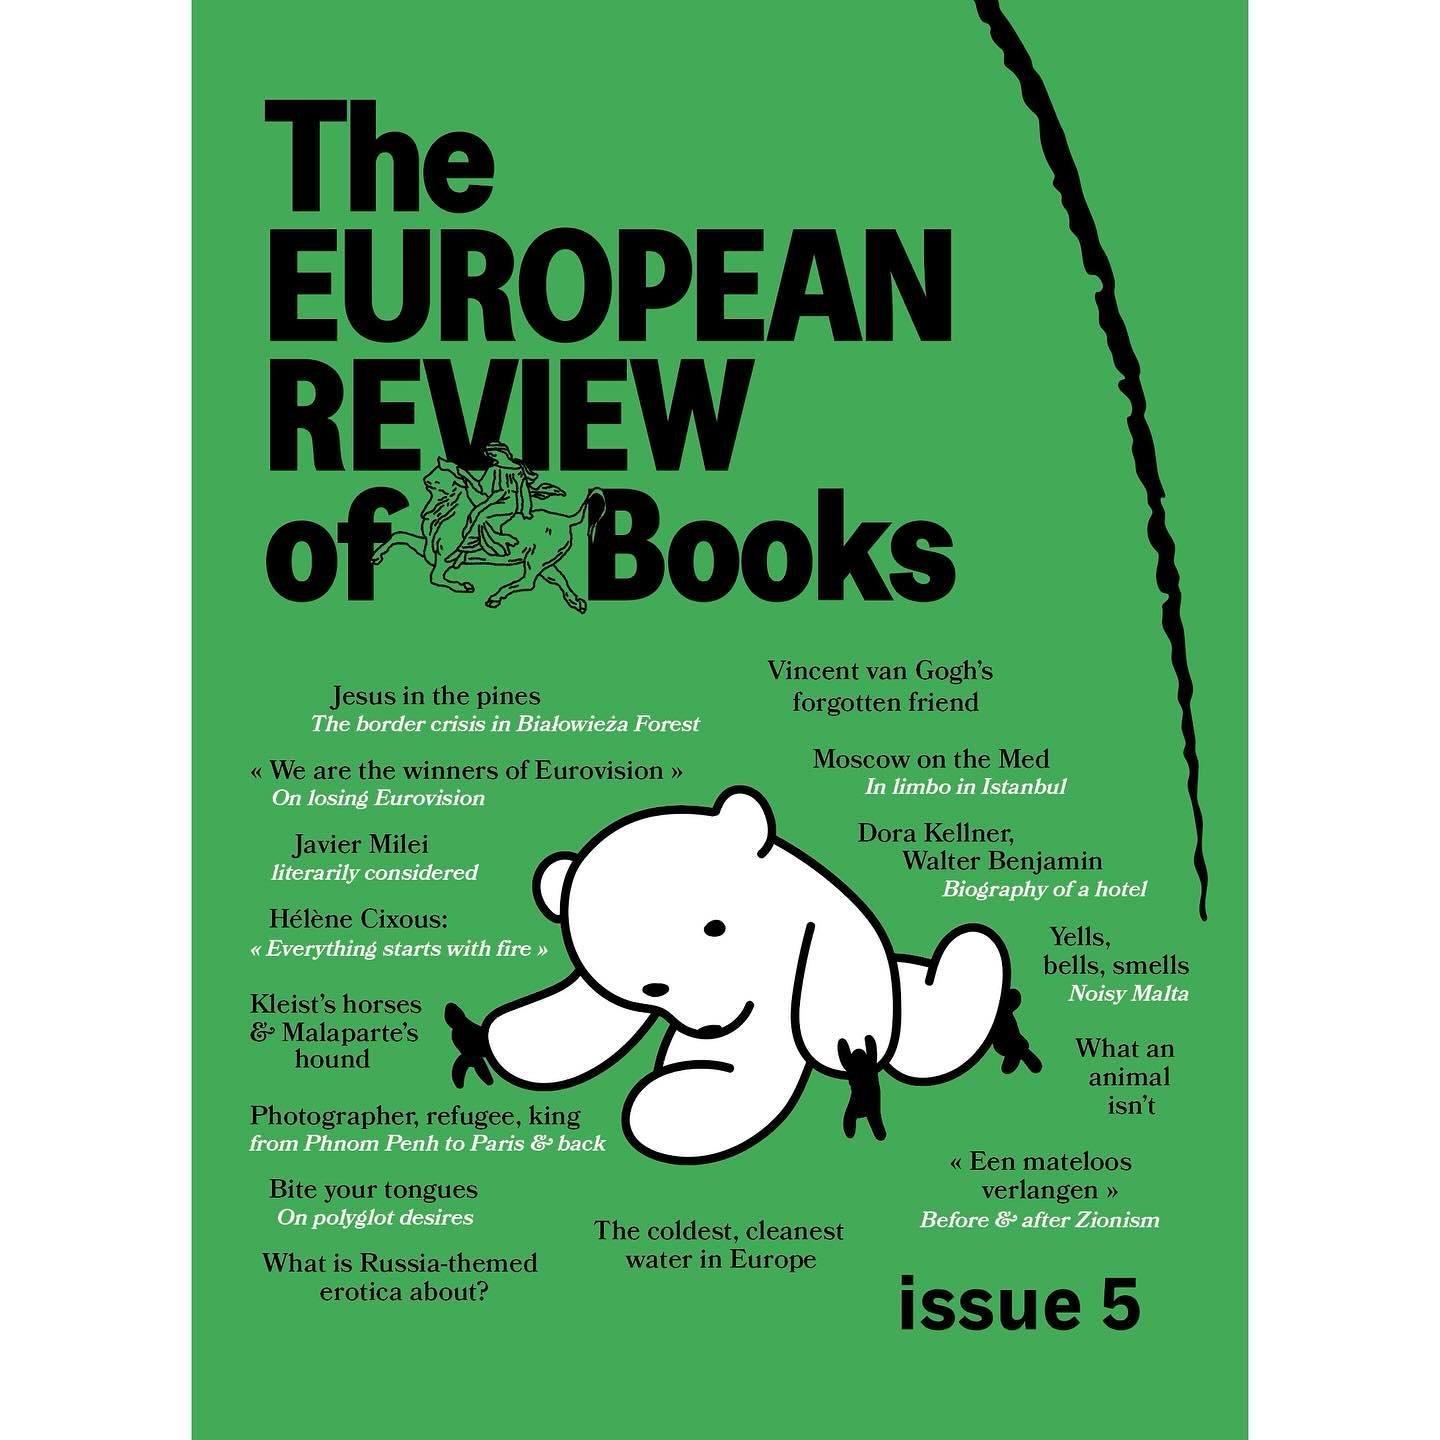 @european_review launches a special edition covering the EU Elections, alongside their spring/summer issue with Eurovision&rsquo;s losers, Slavic erotica, Vincent van Gogh and polyglot desires from Europe&rsquo;s many corners. Out now.